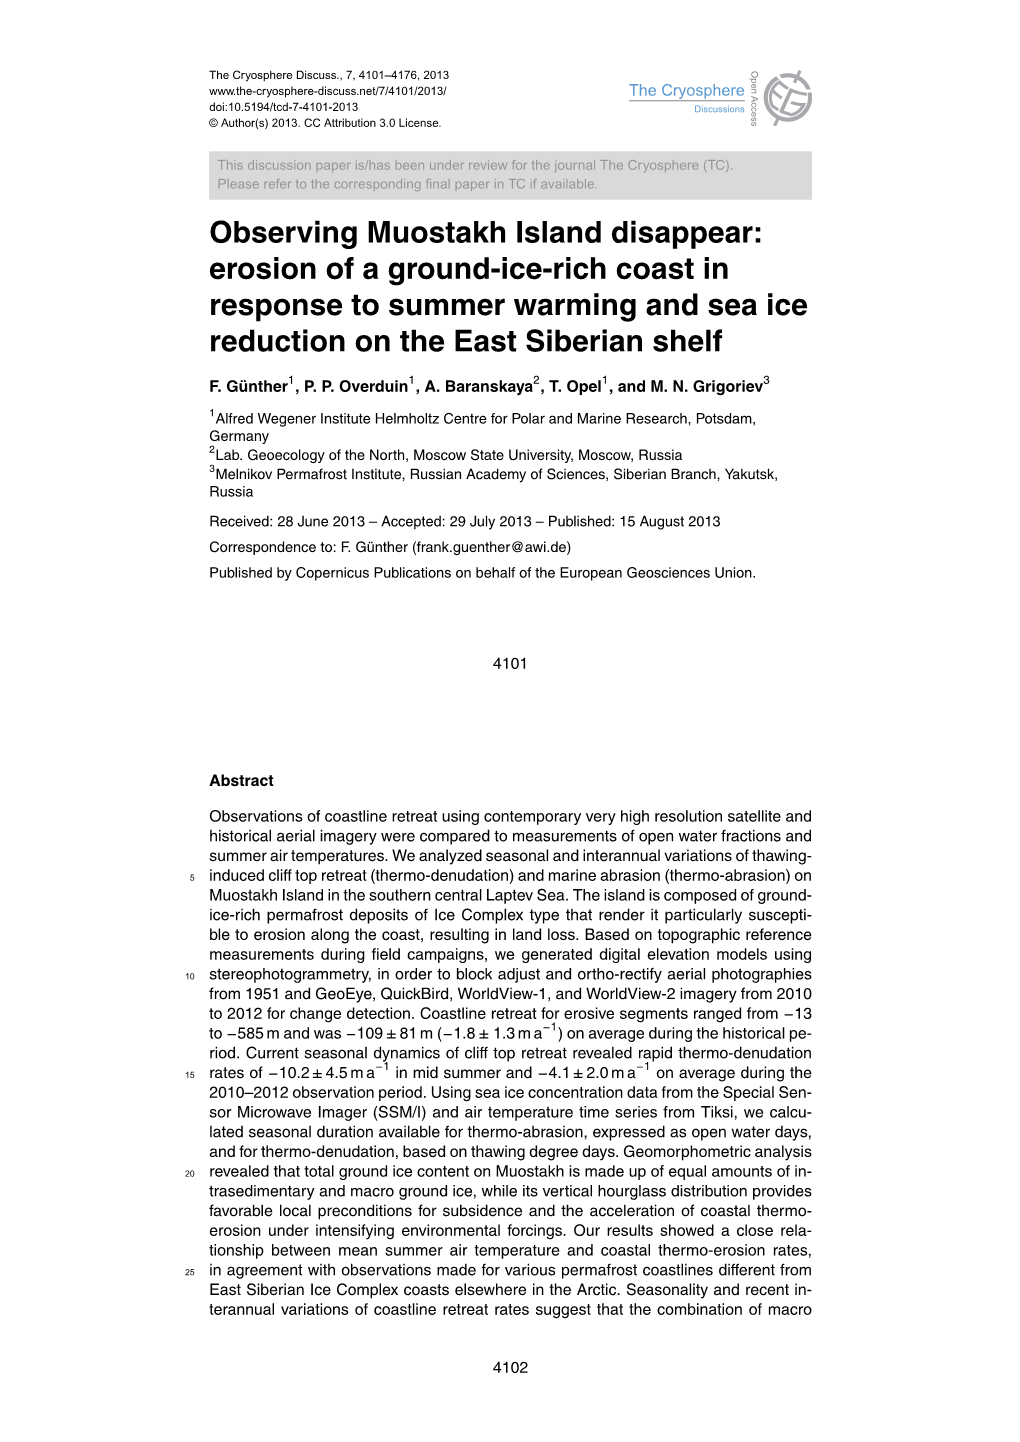 Observing Muostakh Island Disappear: Erosion of a Ground-Ice-Rich Coast in Response to Summer Warming and Sea Ice Reduction on the East Siberian Shelf